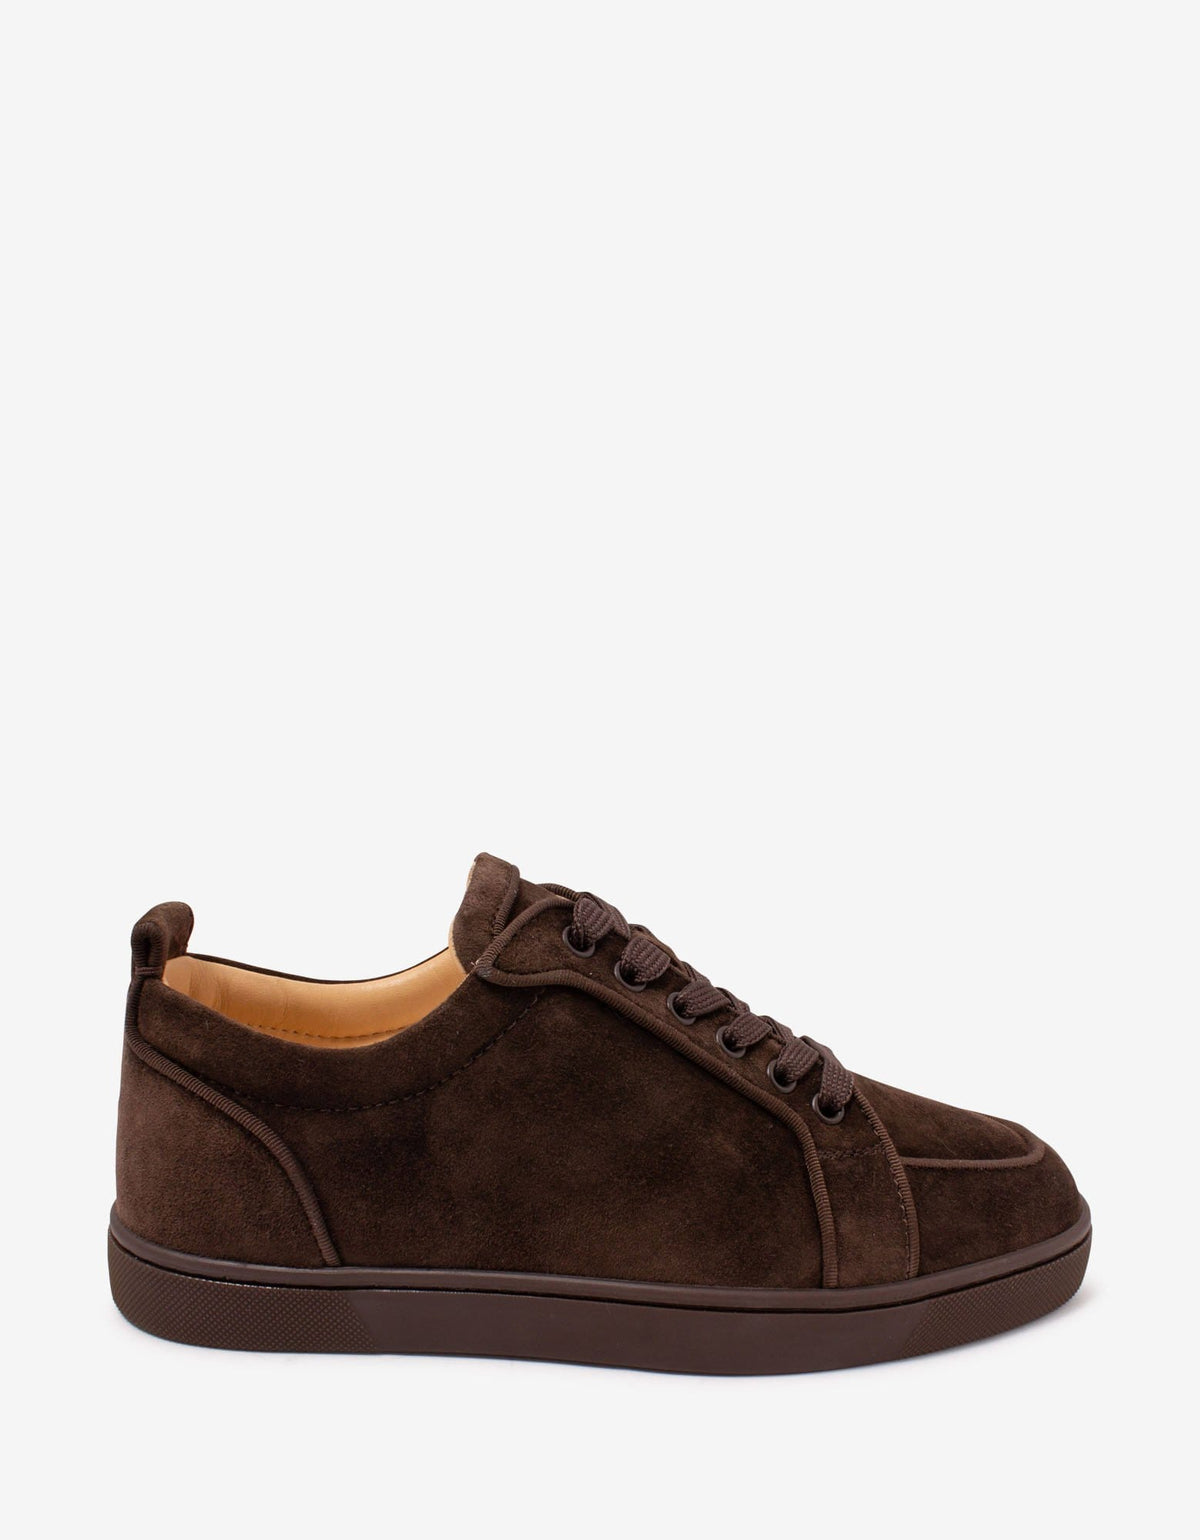 Christian Louboutin - Rantulow Orlato Brown Suede Leather Trainers -